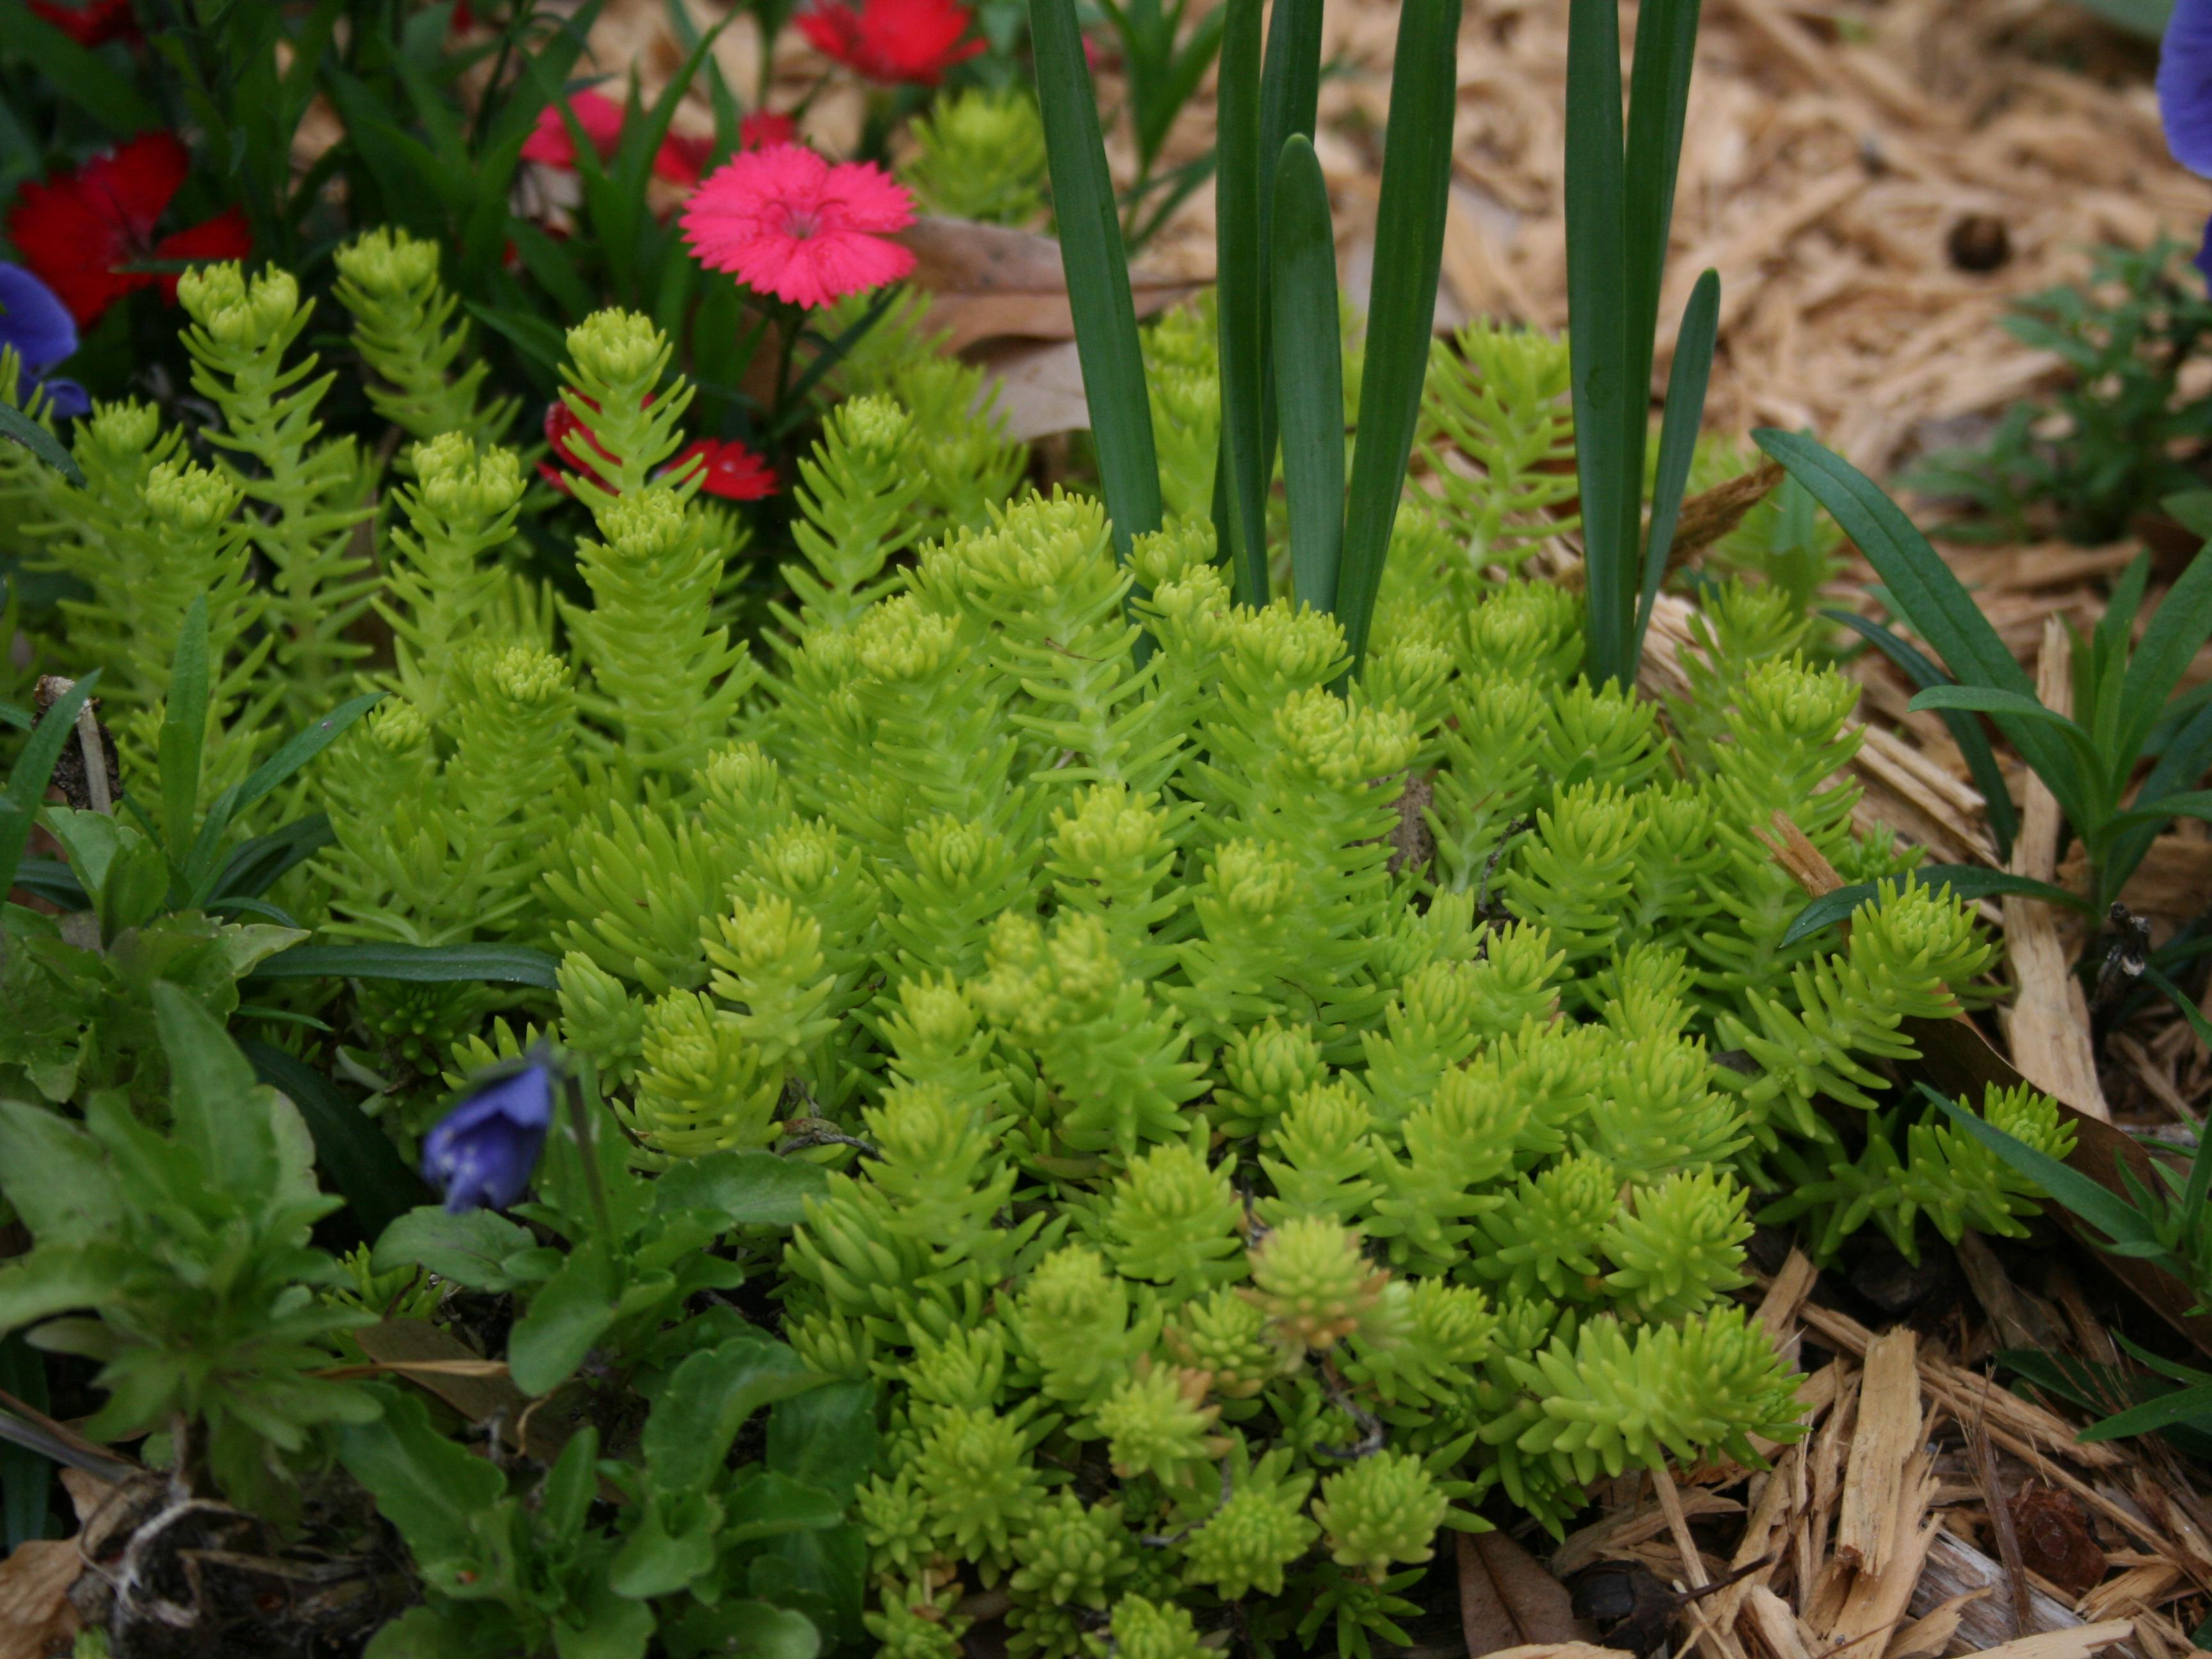 Upright stems of a low-lying chartreuse plant sprout from a landscape bed.